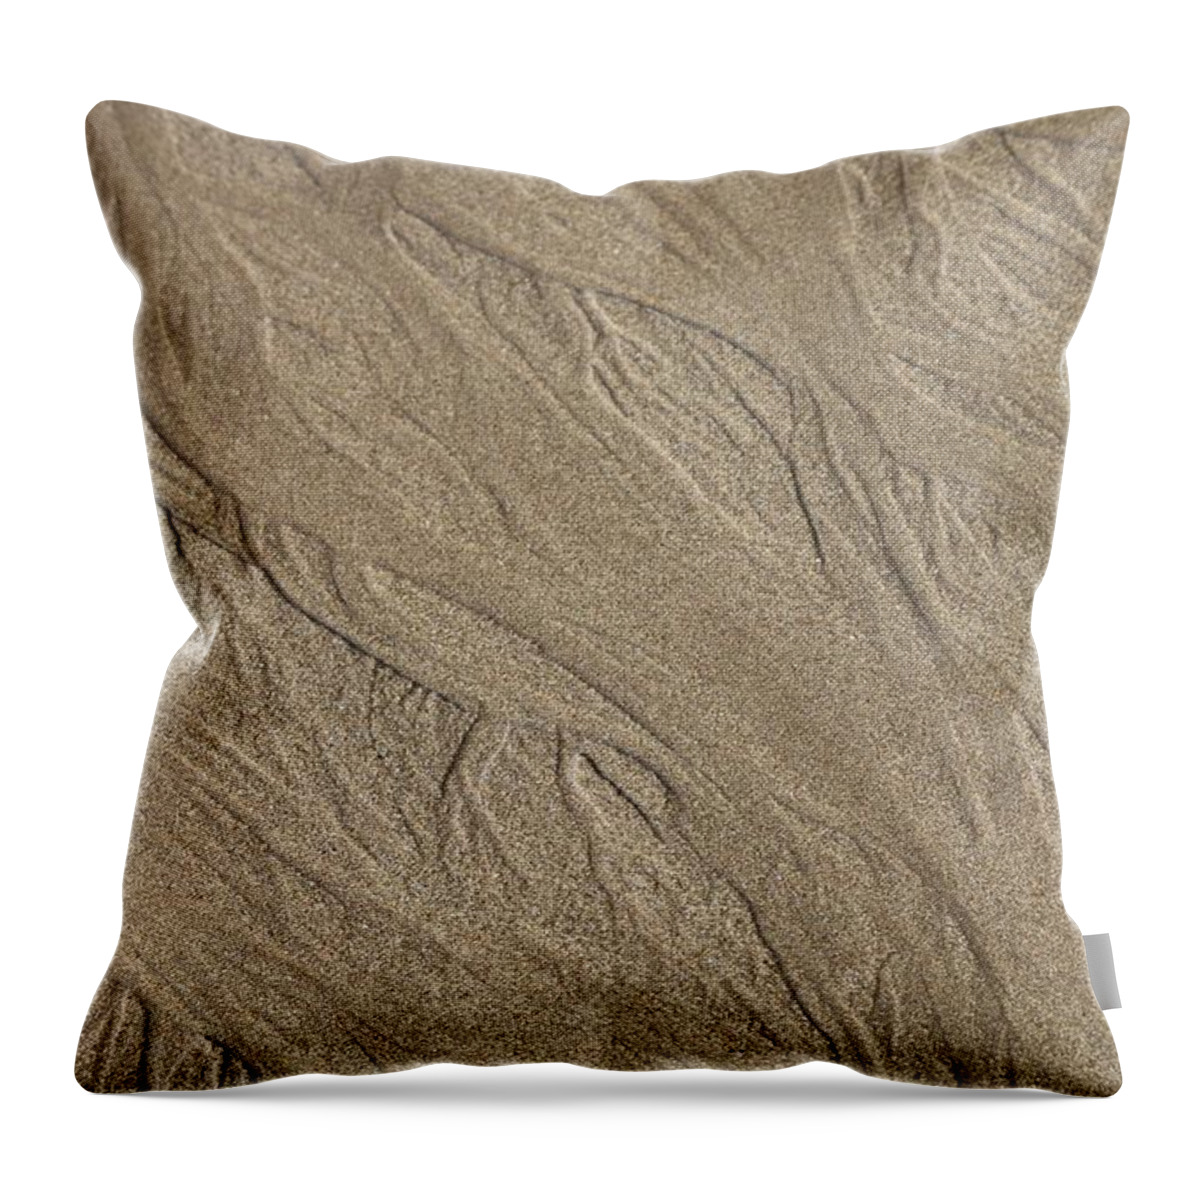 Sand Pattern Throw Pillow featuring the photograph Sand Patterns by Living Color Photography Lorraine Lynch